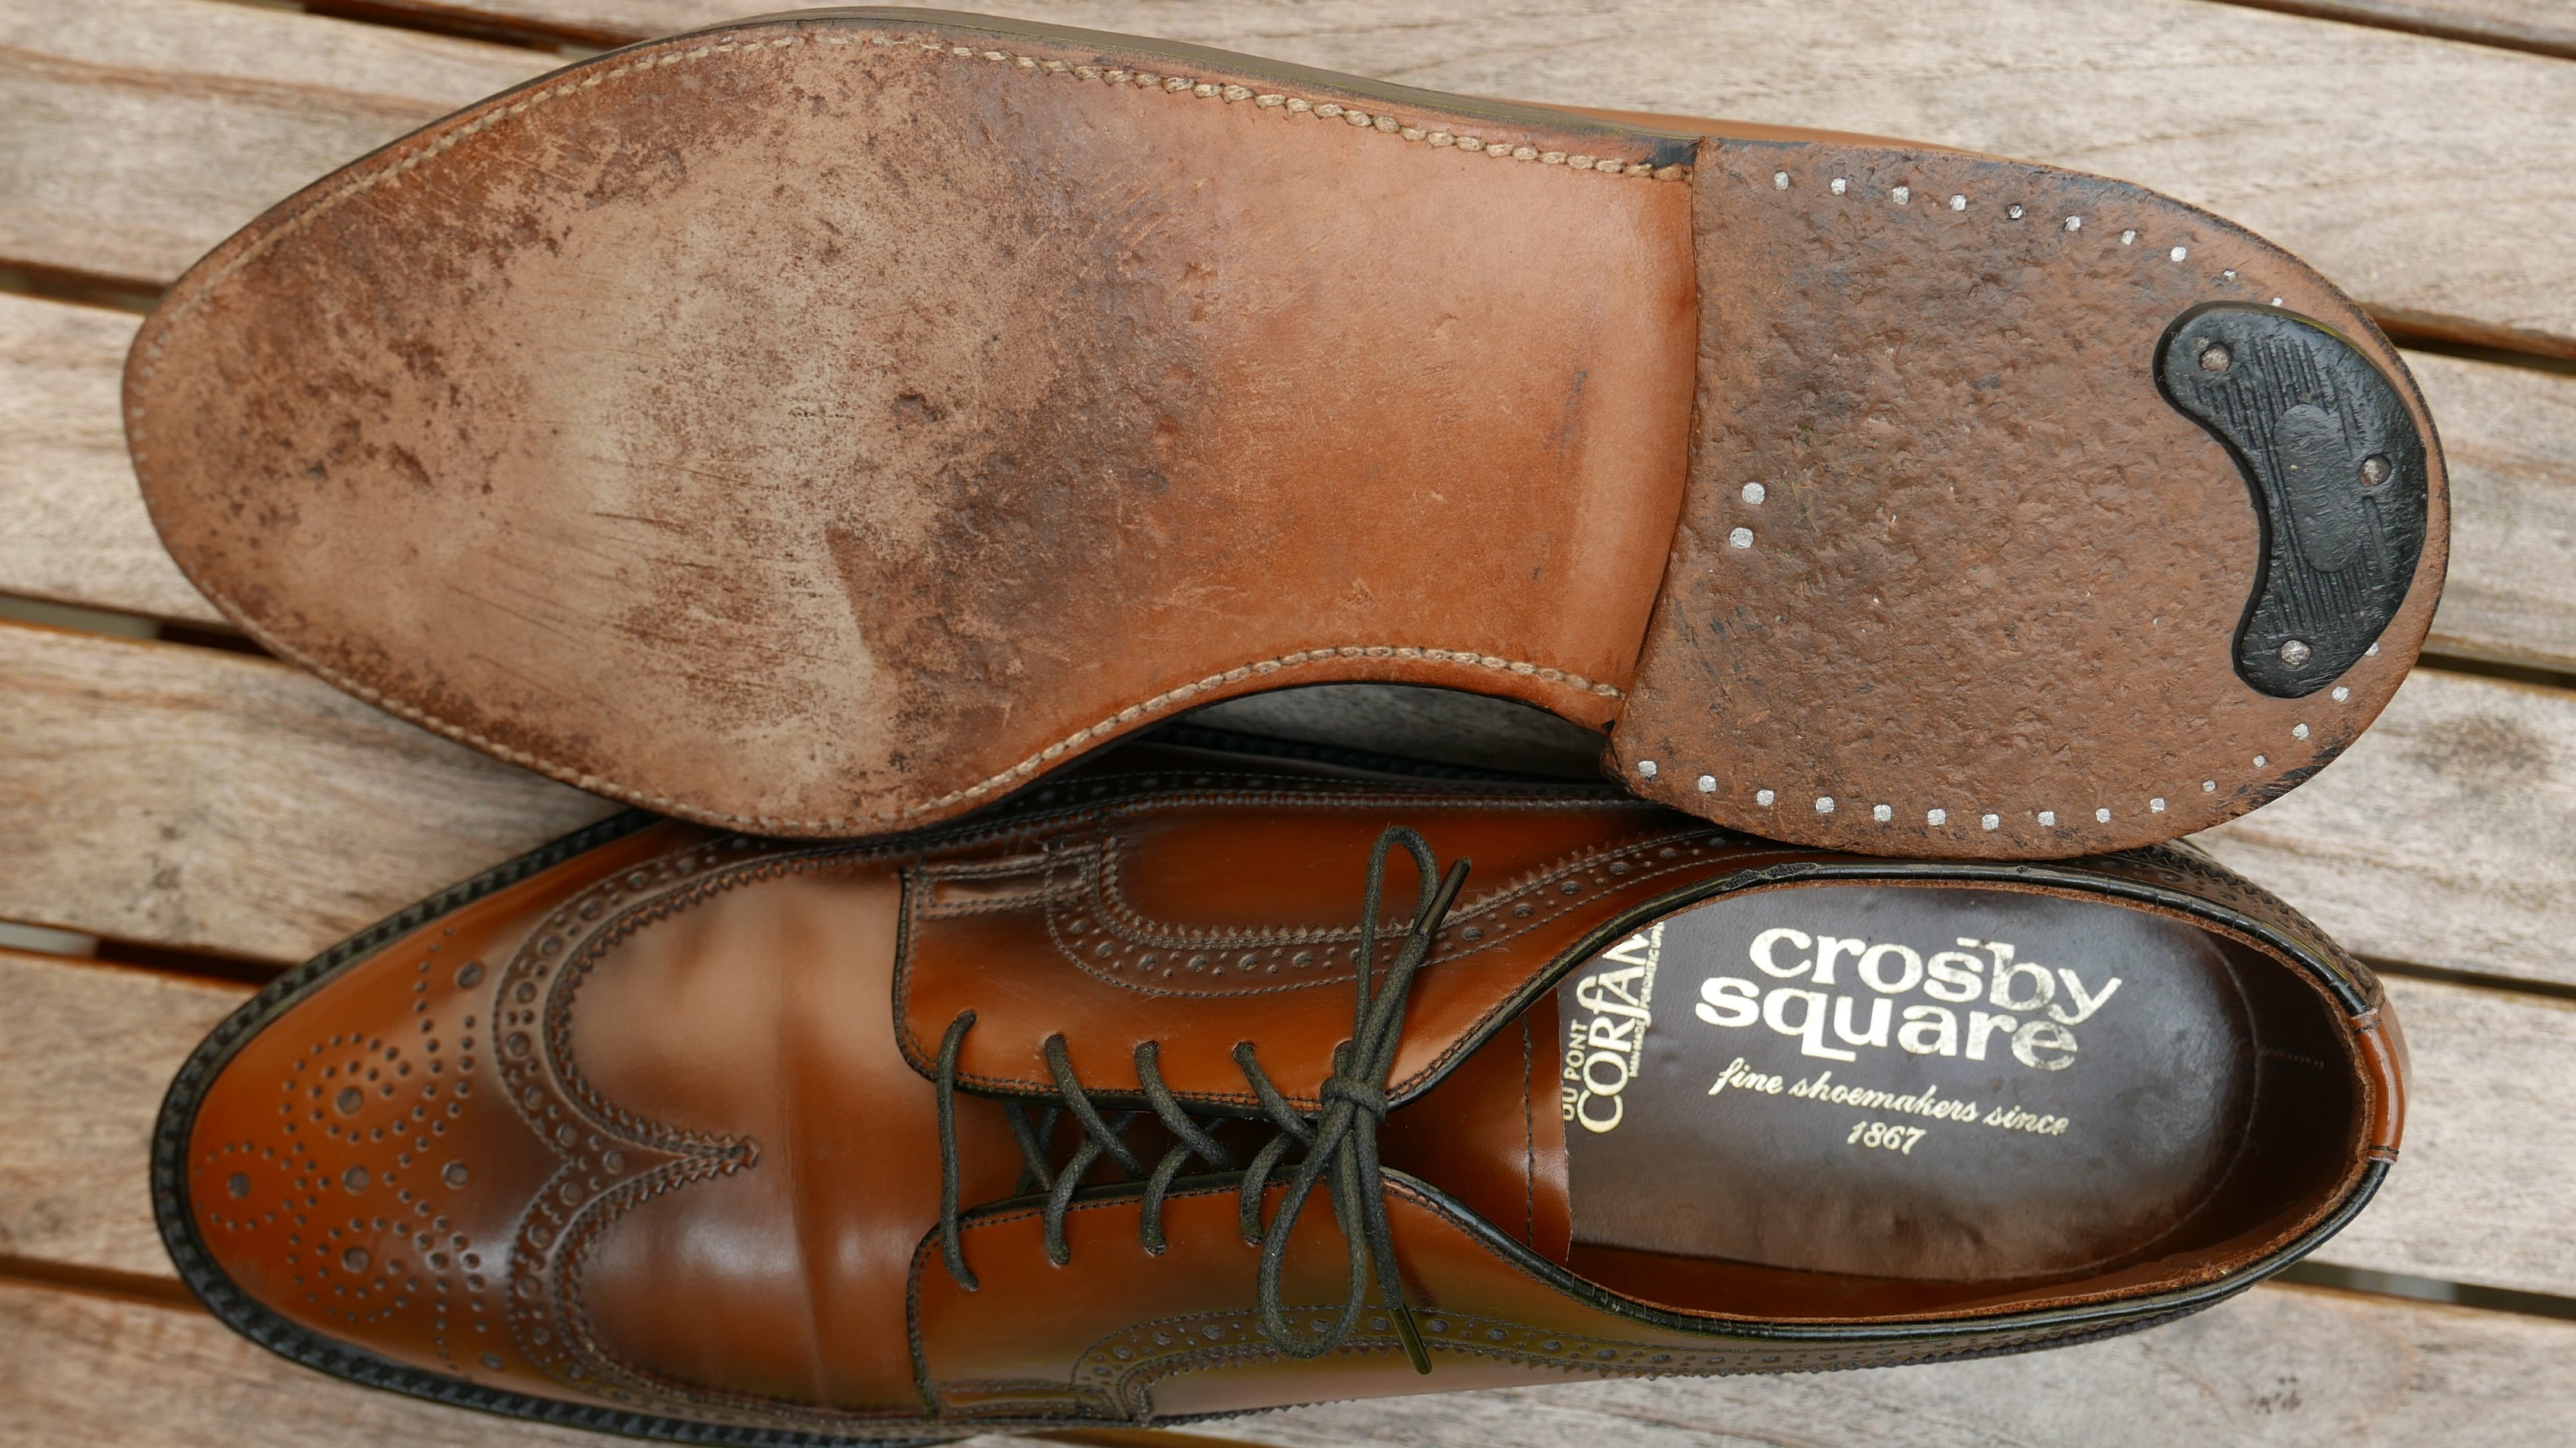 Crosby Square shoes